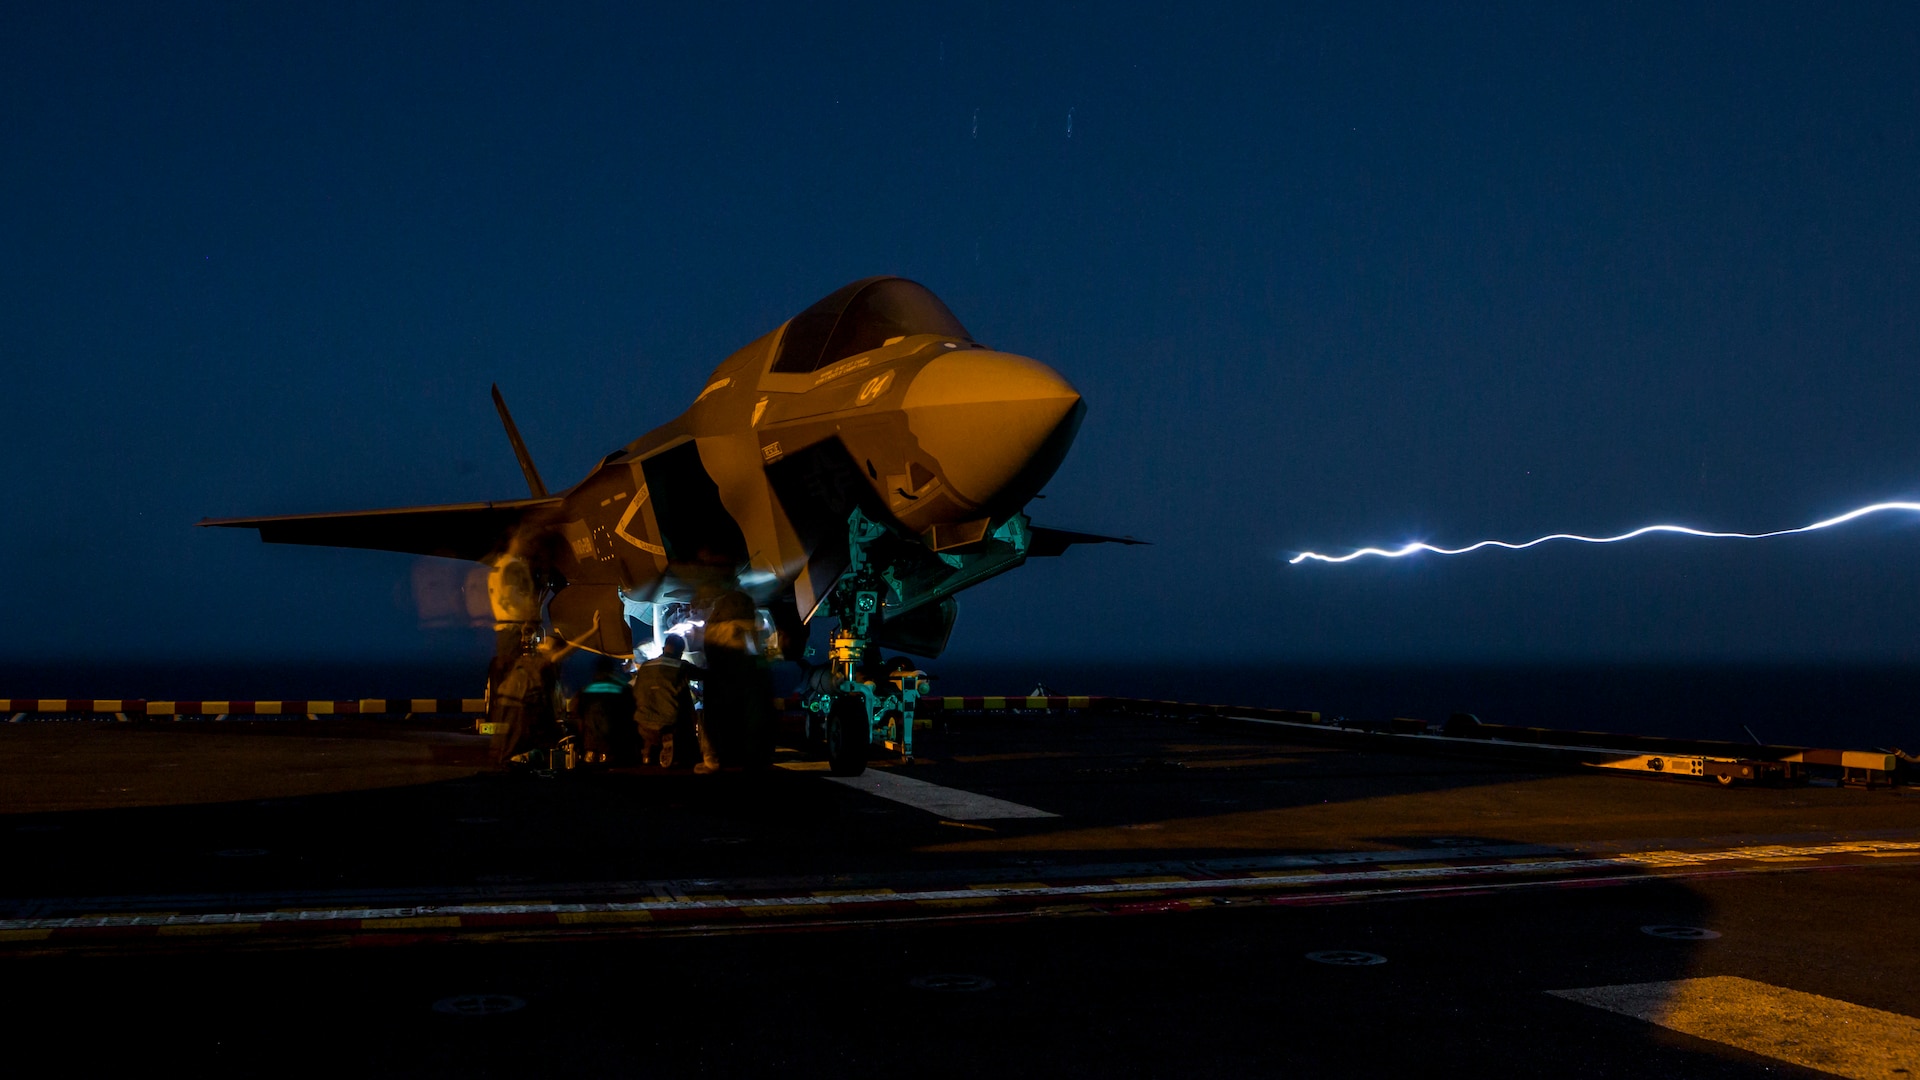 U.S. Marines with Marine Fighter Attack Squadron 211, 13th Marine Expeditionary Unit (MEU), load ordnance into an F-35B Lightning II aboard the Wasp-class amphibious assault ship USS Essex (LHD 2) in preparation for the F-35B's first combat strike, Sept. 27, 2018. The Essex is the flagship for the Essex Amphibious Ready Group and, with the embarked 13th MEU, is deployed to the U.S. 5th Fleet area of operations in support of naval operations to ensure maritime stability and security in the Central Region, connecting the Mediterranean and the Pacific through the western Indian Ocean and three strategic choke points. (U.S. Marine Corps photo by Cpl. A. J. Van Fredenberg/Released)